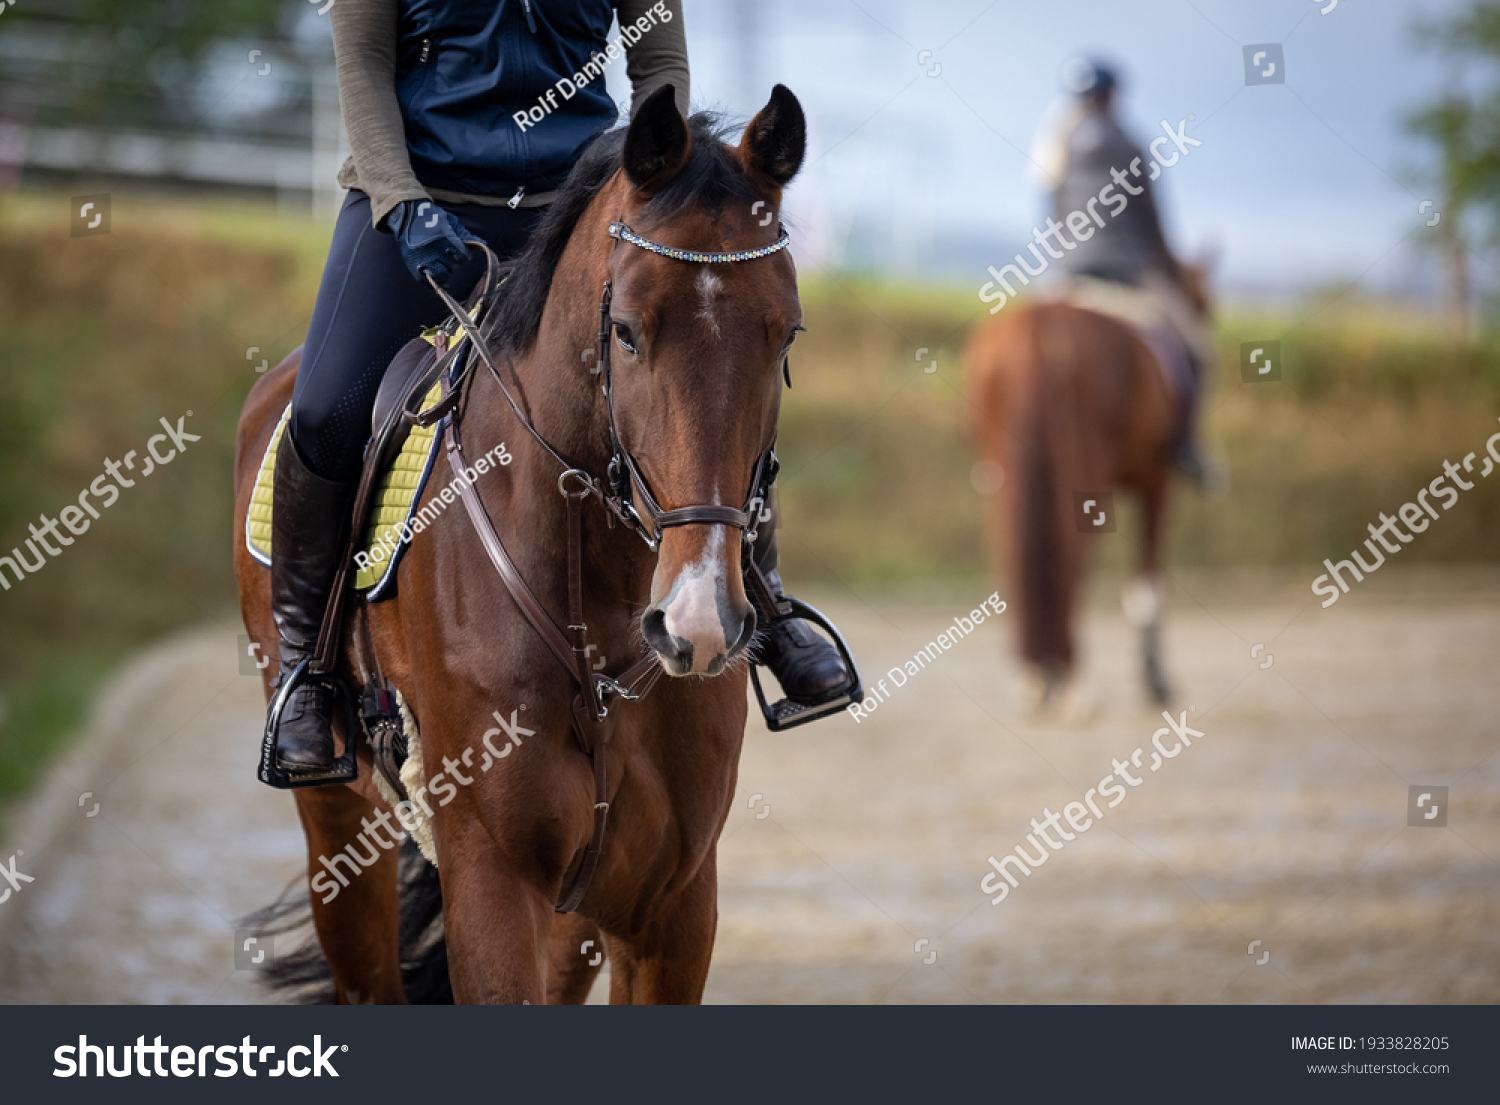 Horse with rider on the riding arena, close-up of horse from the front, second rider out of focus in the background. #1933828205